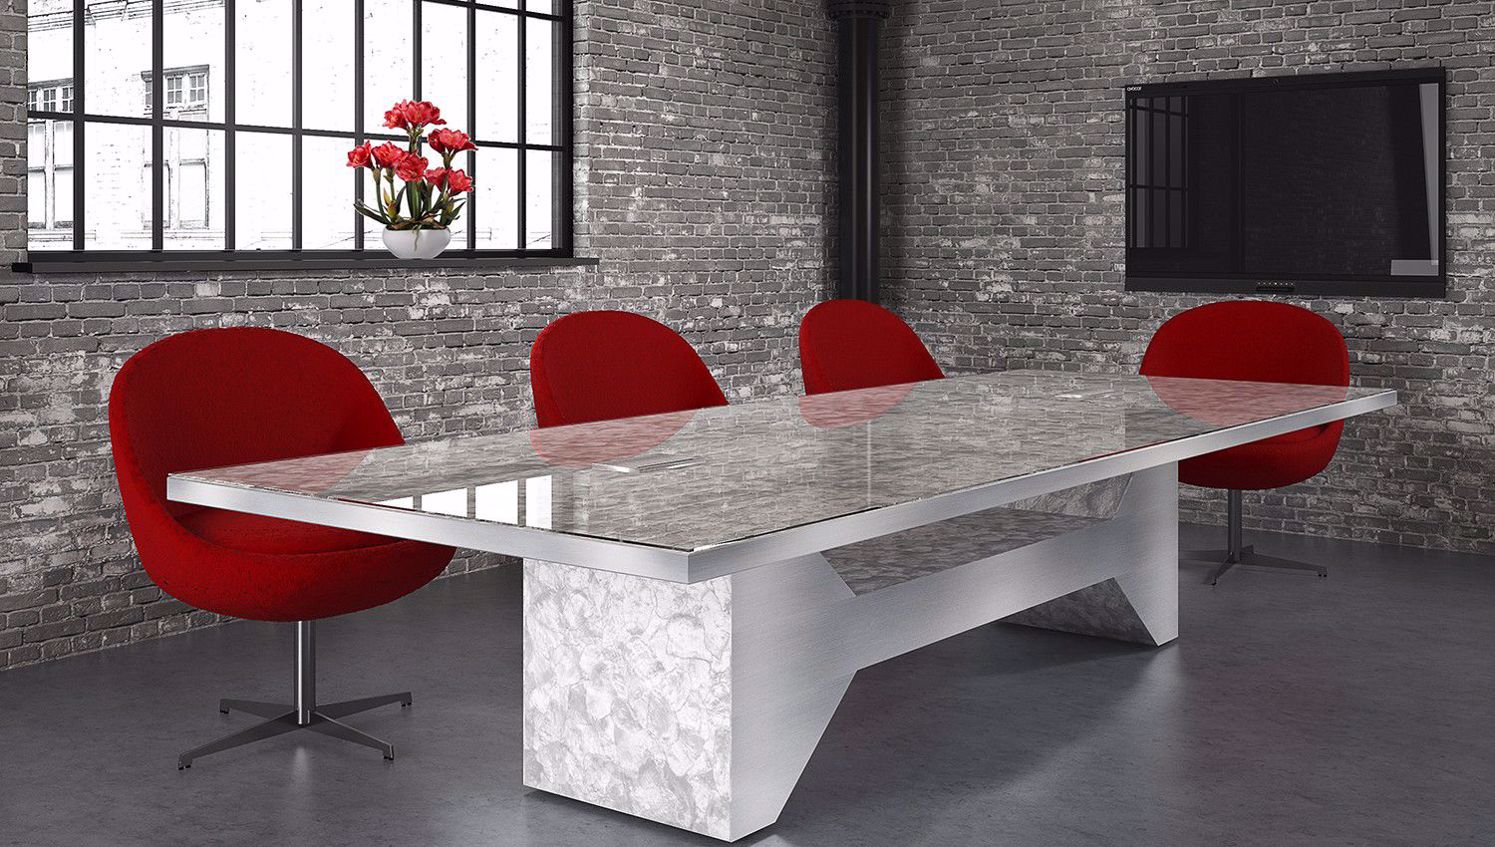 6 Clever Moves When Designing a New Modern Conference Room